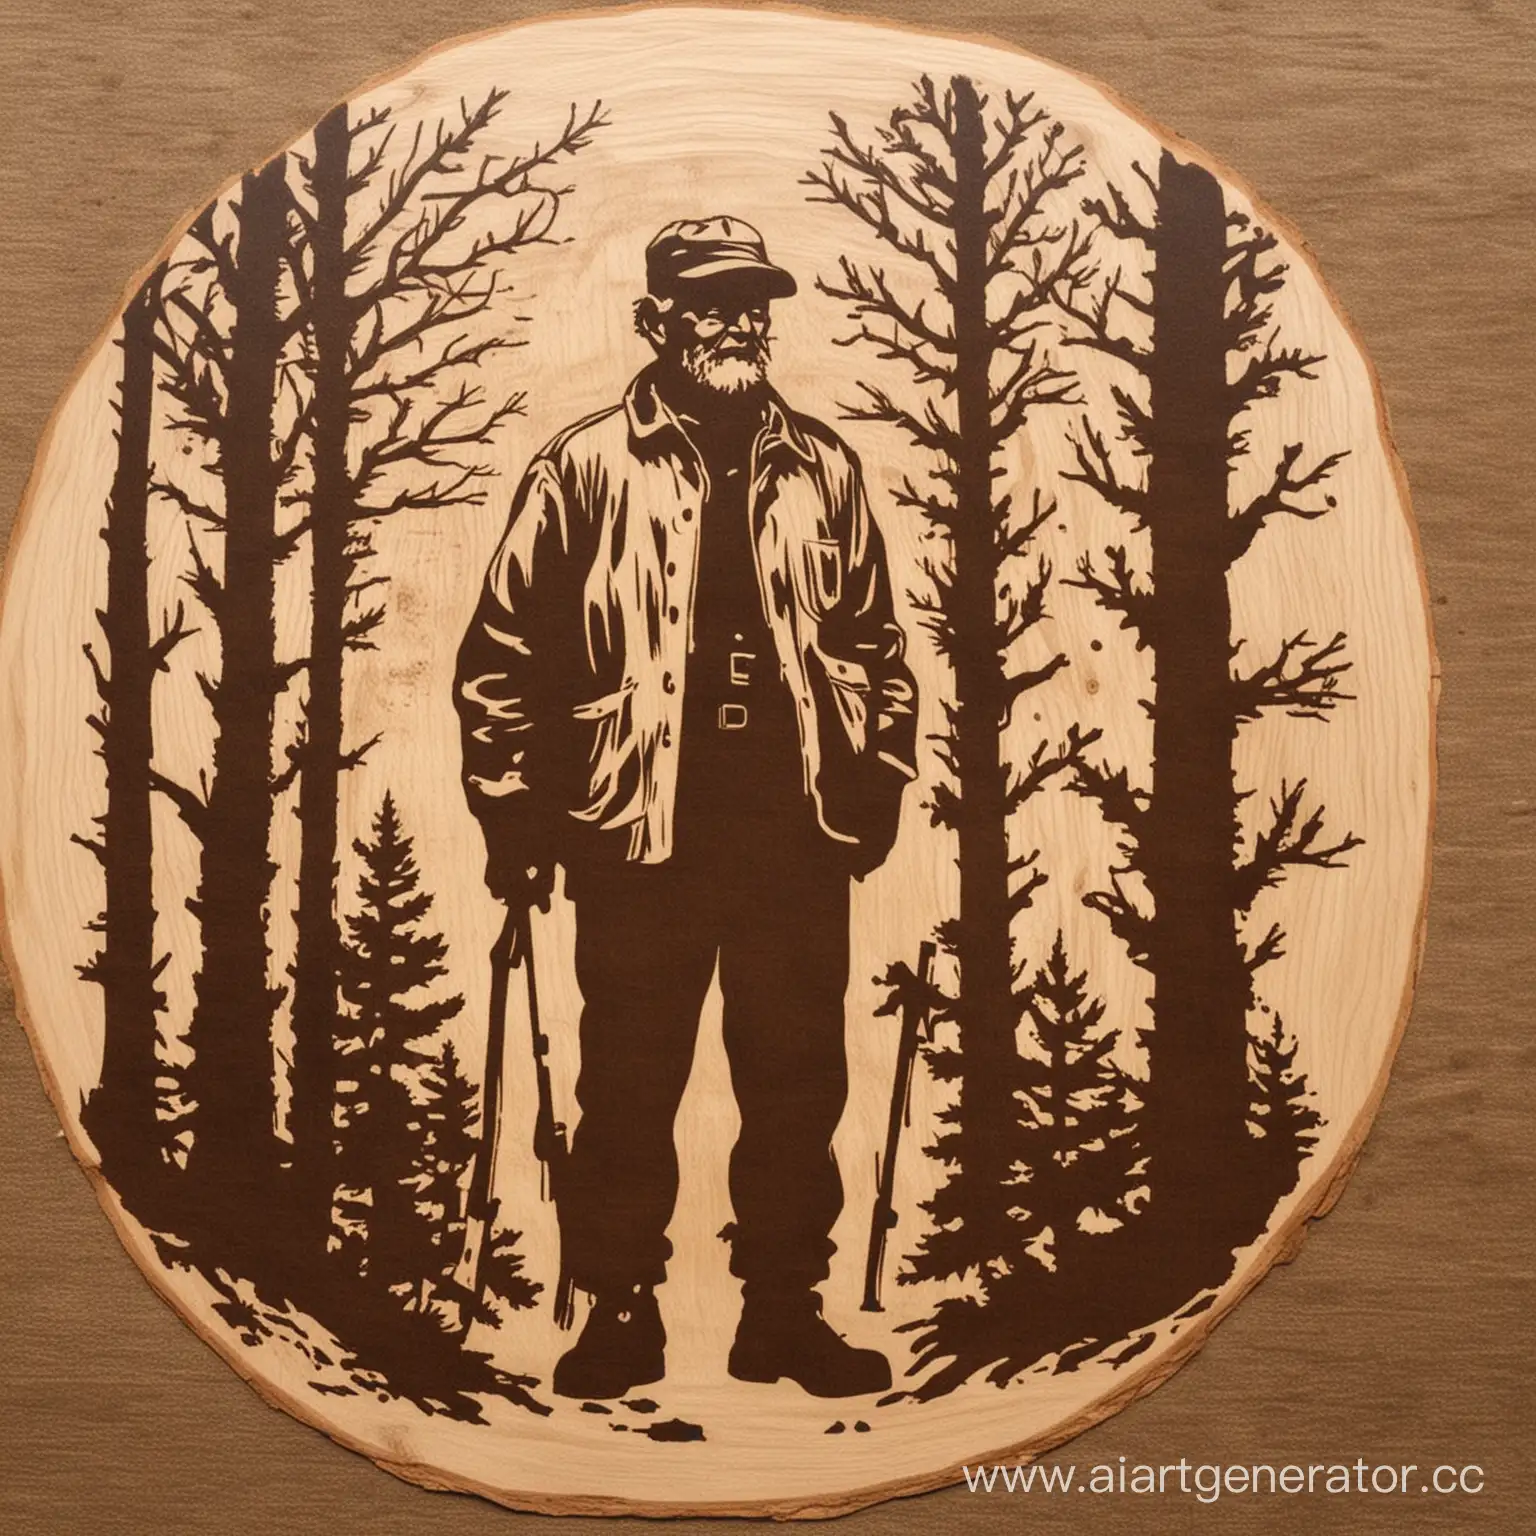 Grandfather-Forester-Stencil-Art-Elderly-Man-in-the-Woods-with-Nature-Patterns